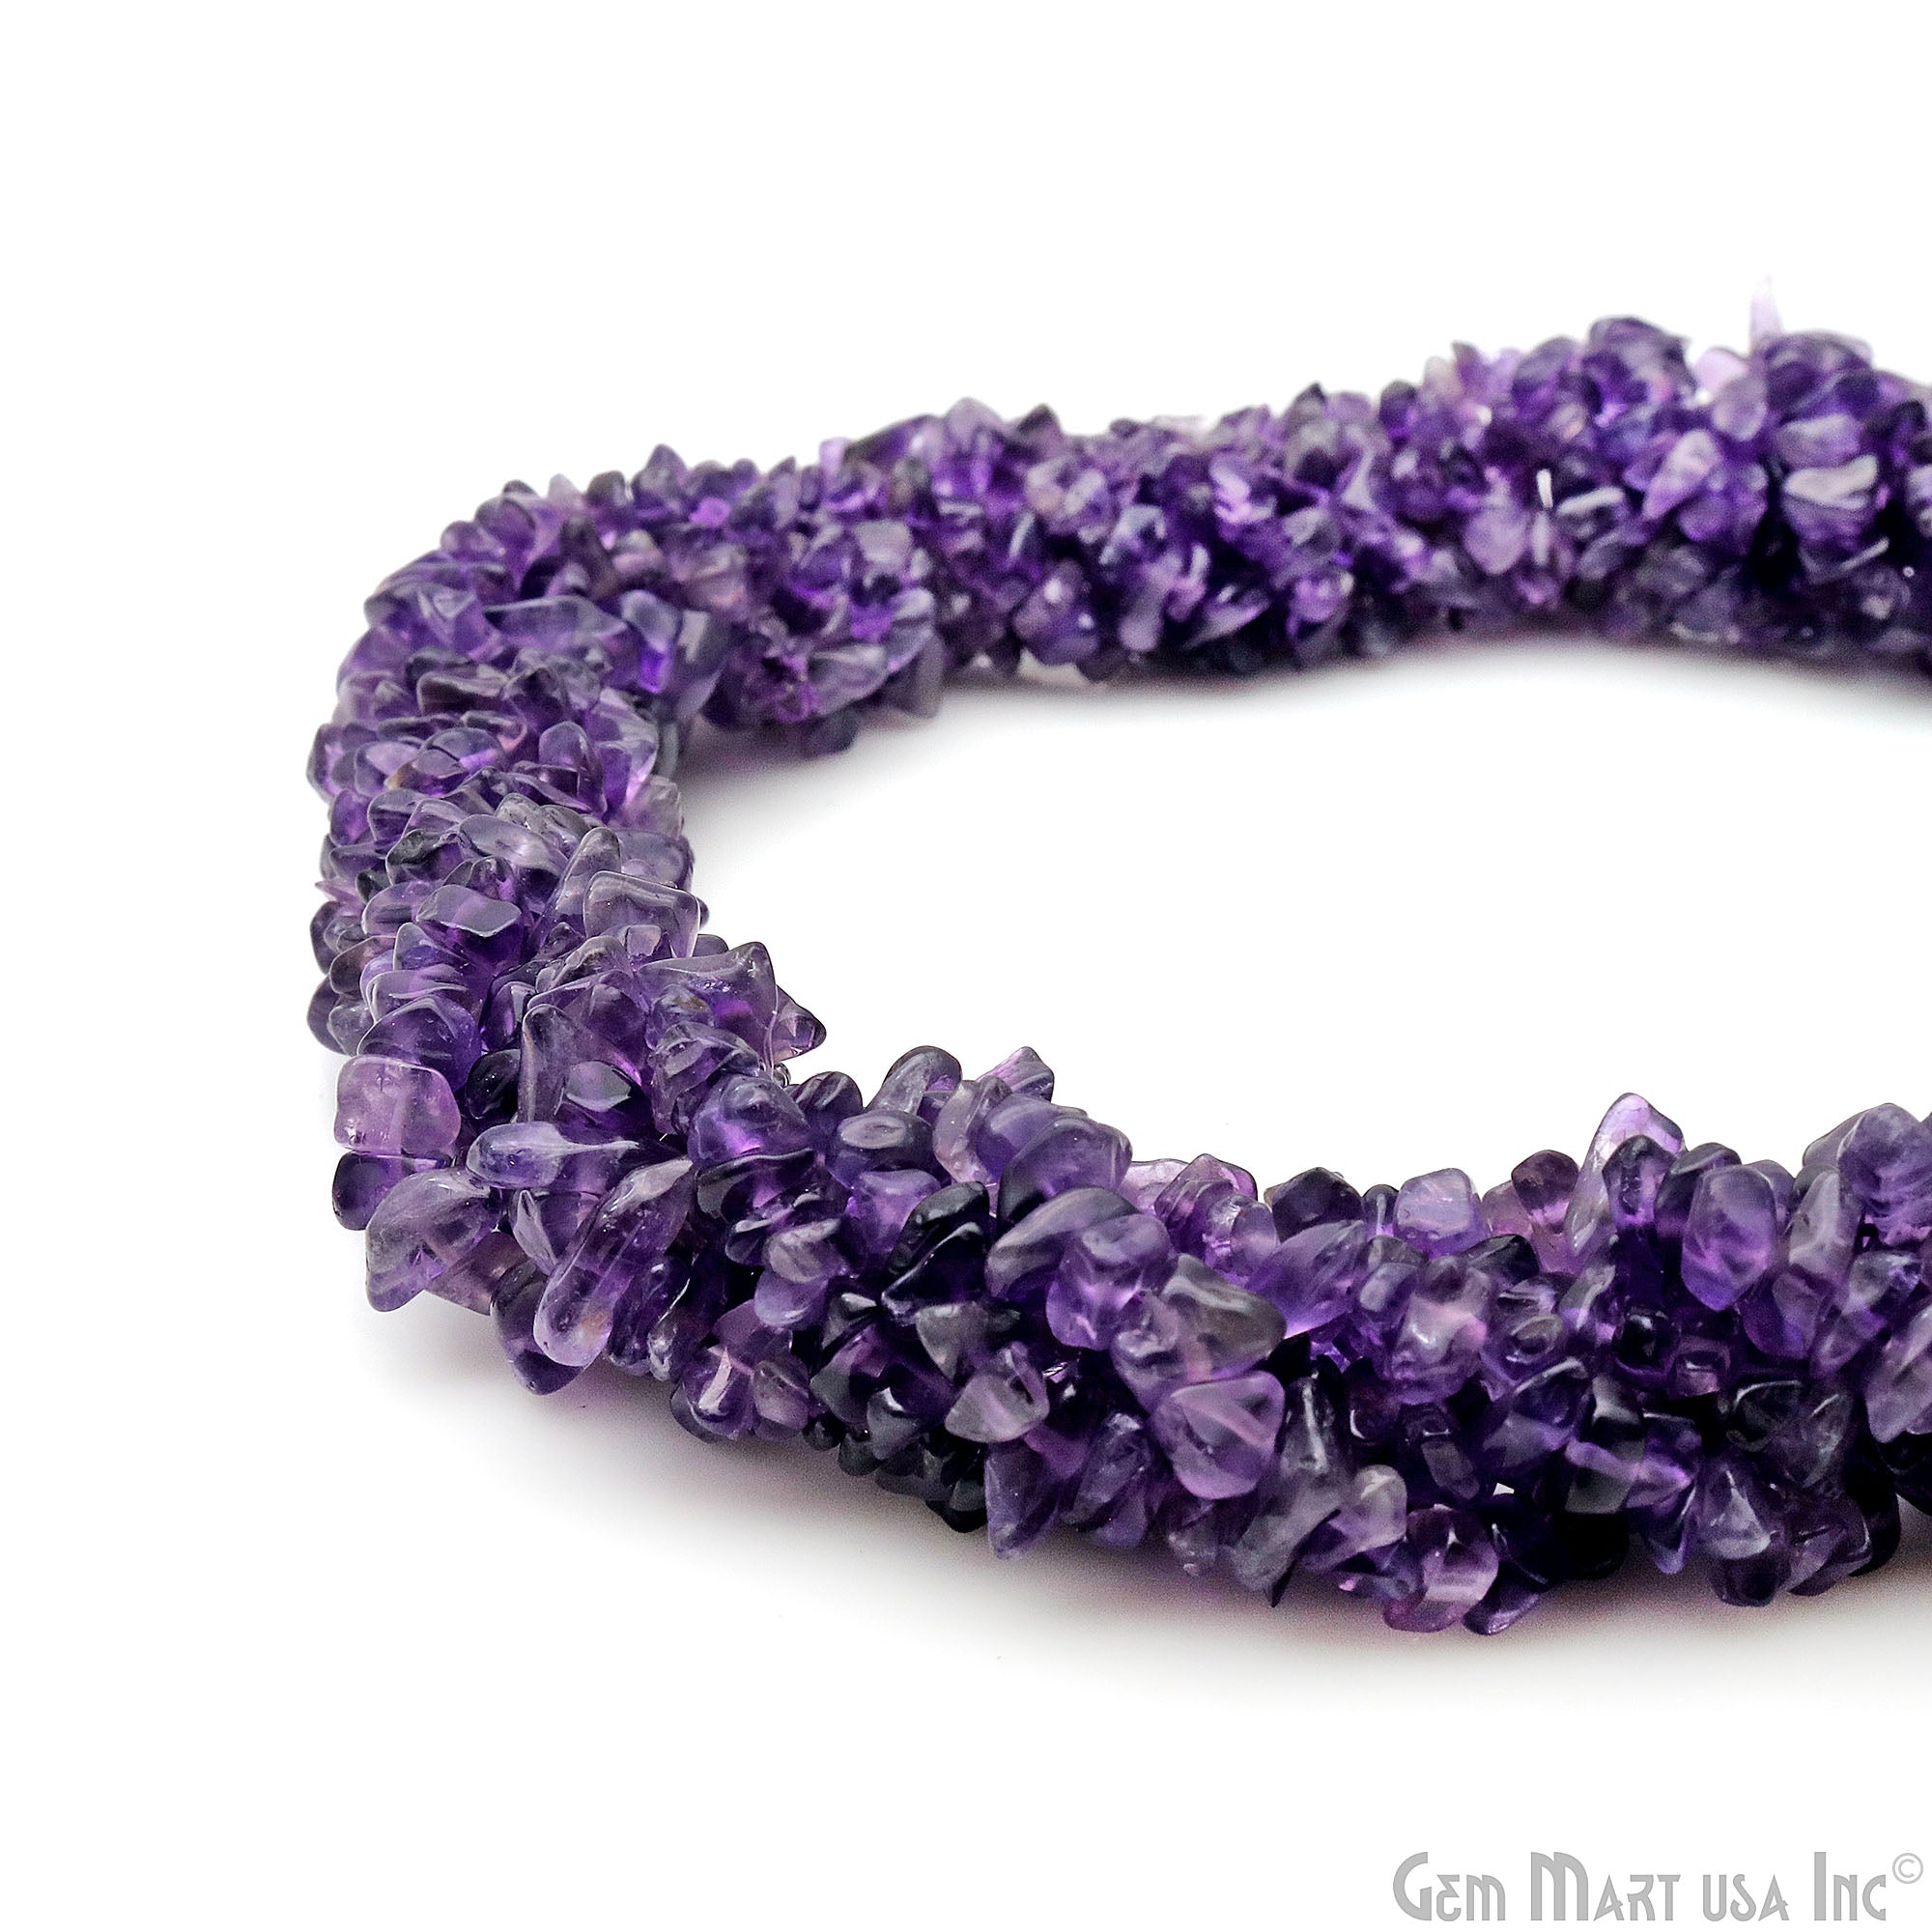 Natural Amethyst chip Gemstone stone beads 1 full strand 34 inch Wholesale Price (CHAA-70001) (762203930671)